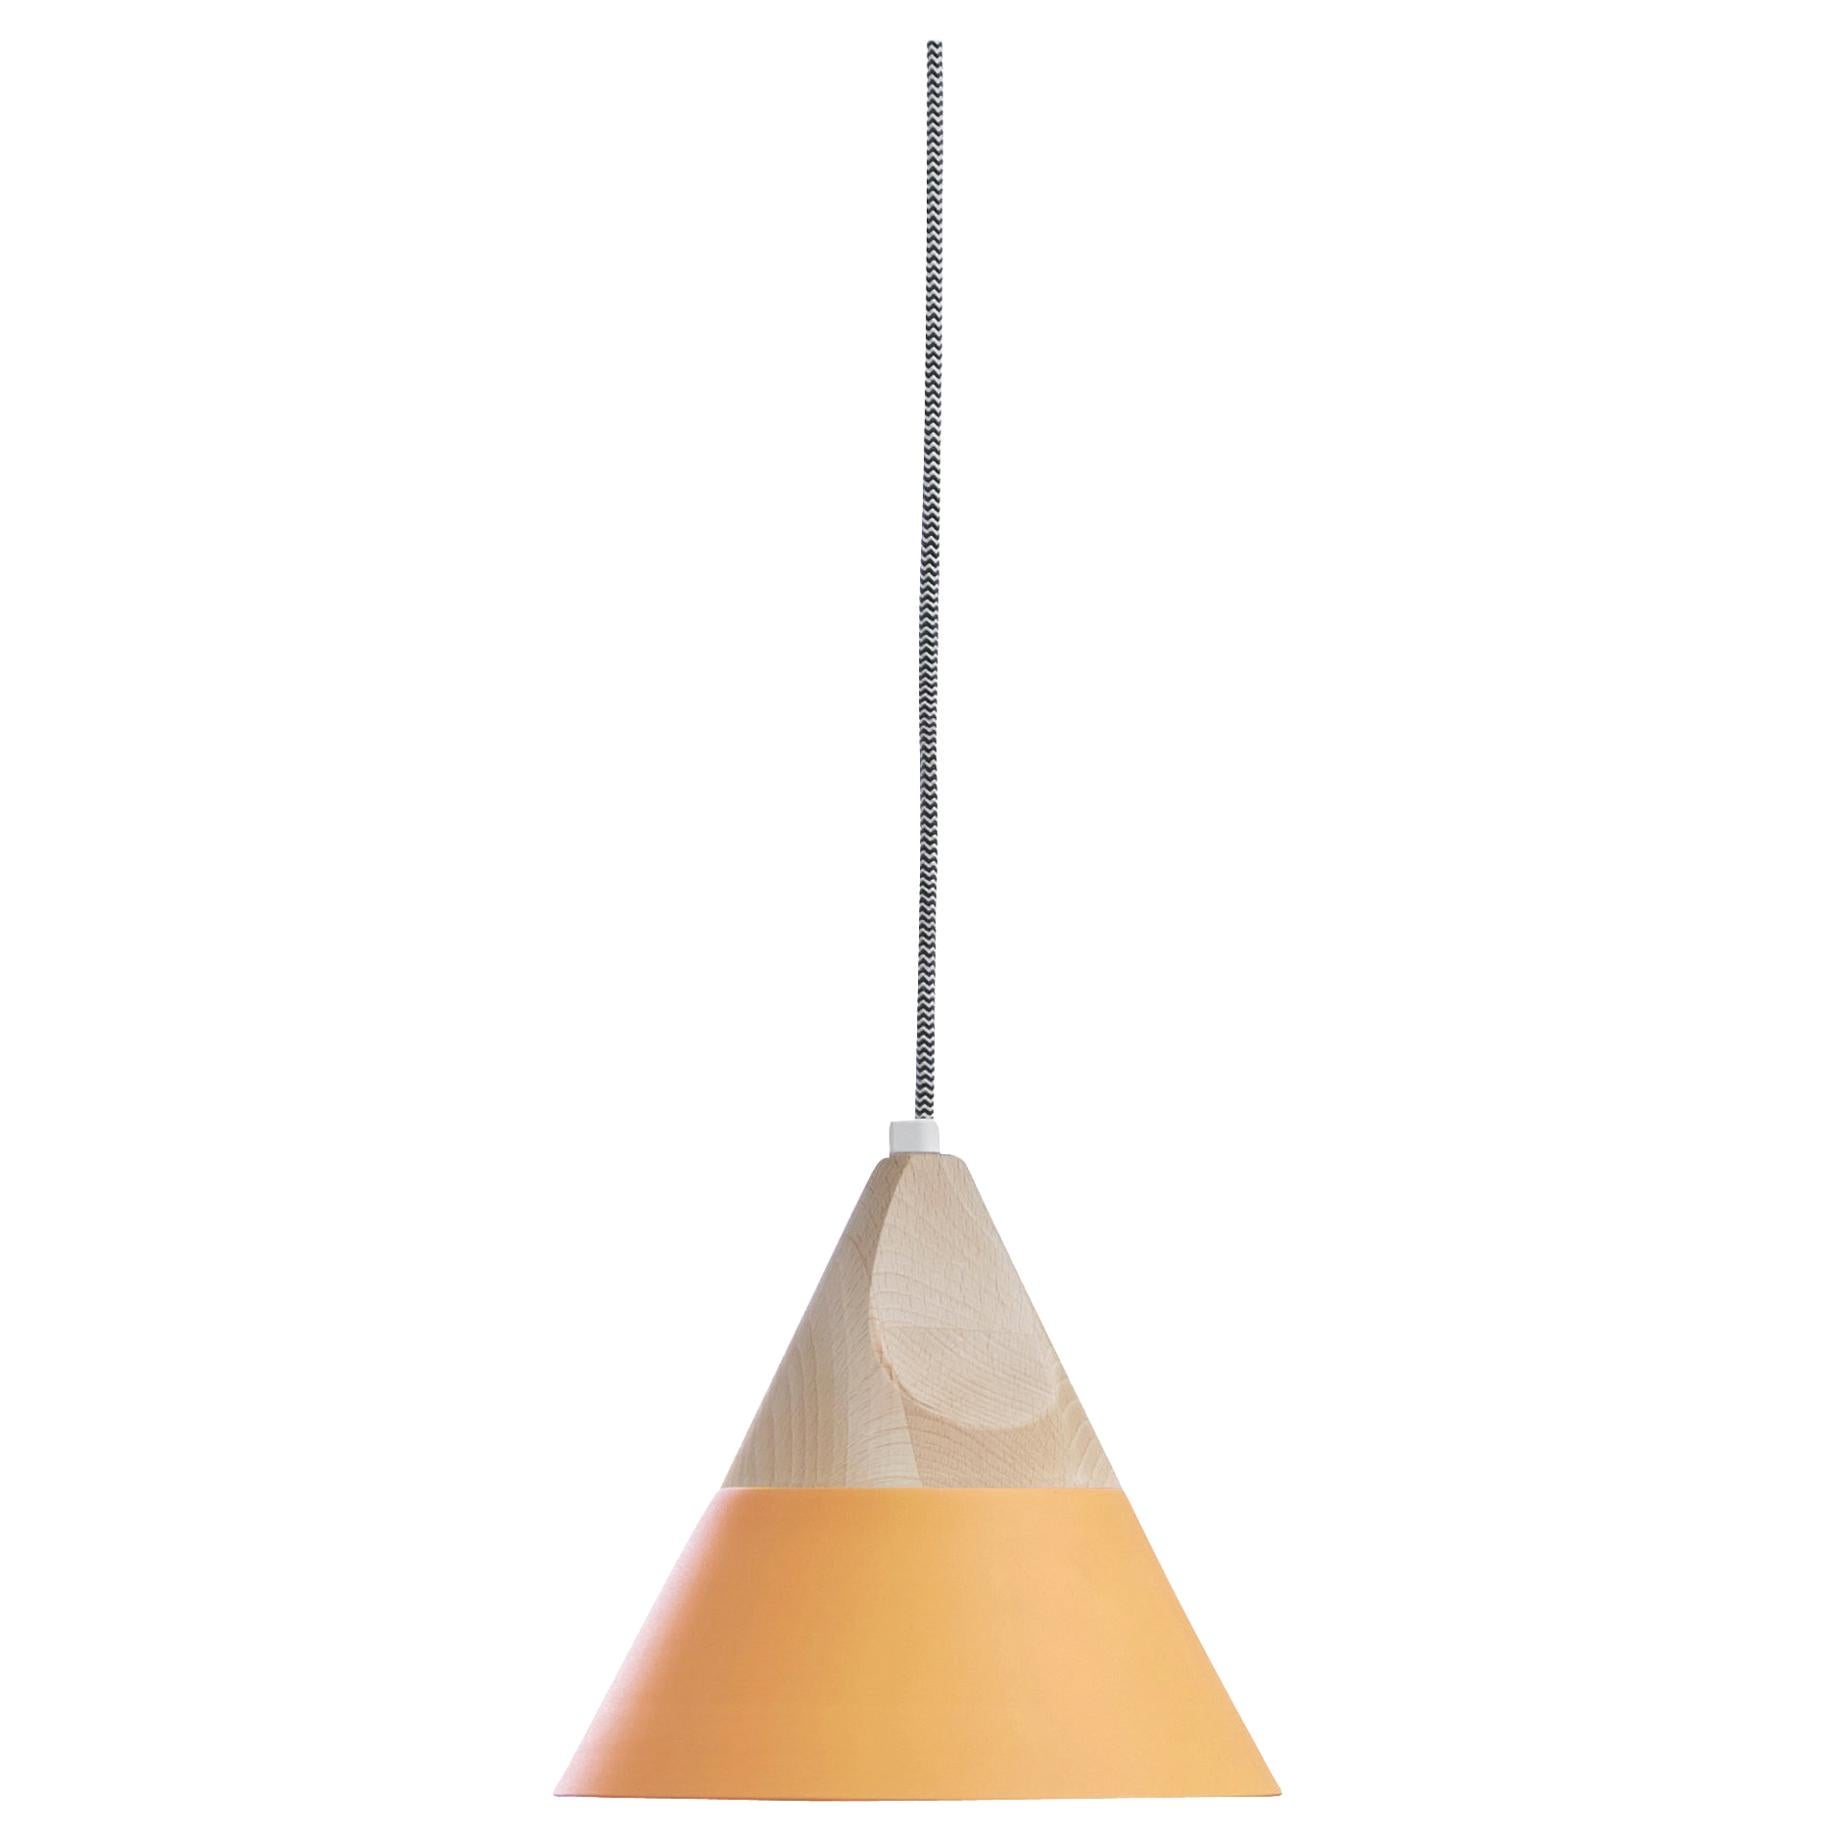 Slope Ceiling Lamp in Beech and Lacquered Apricot Shade by Skrivo